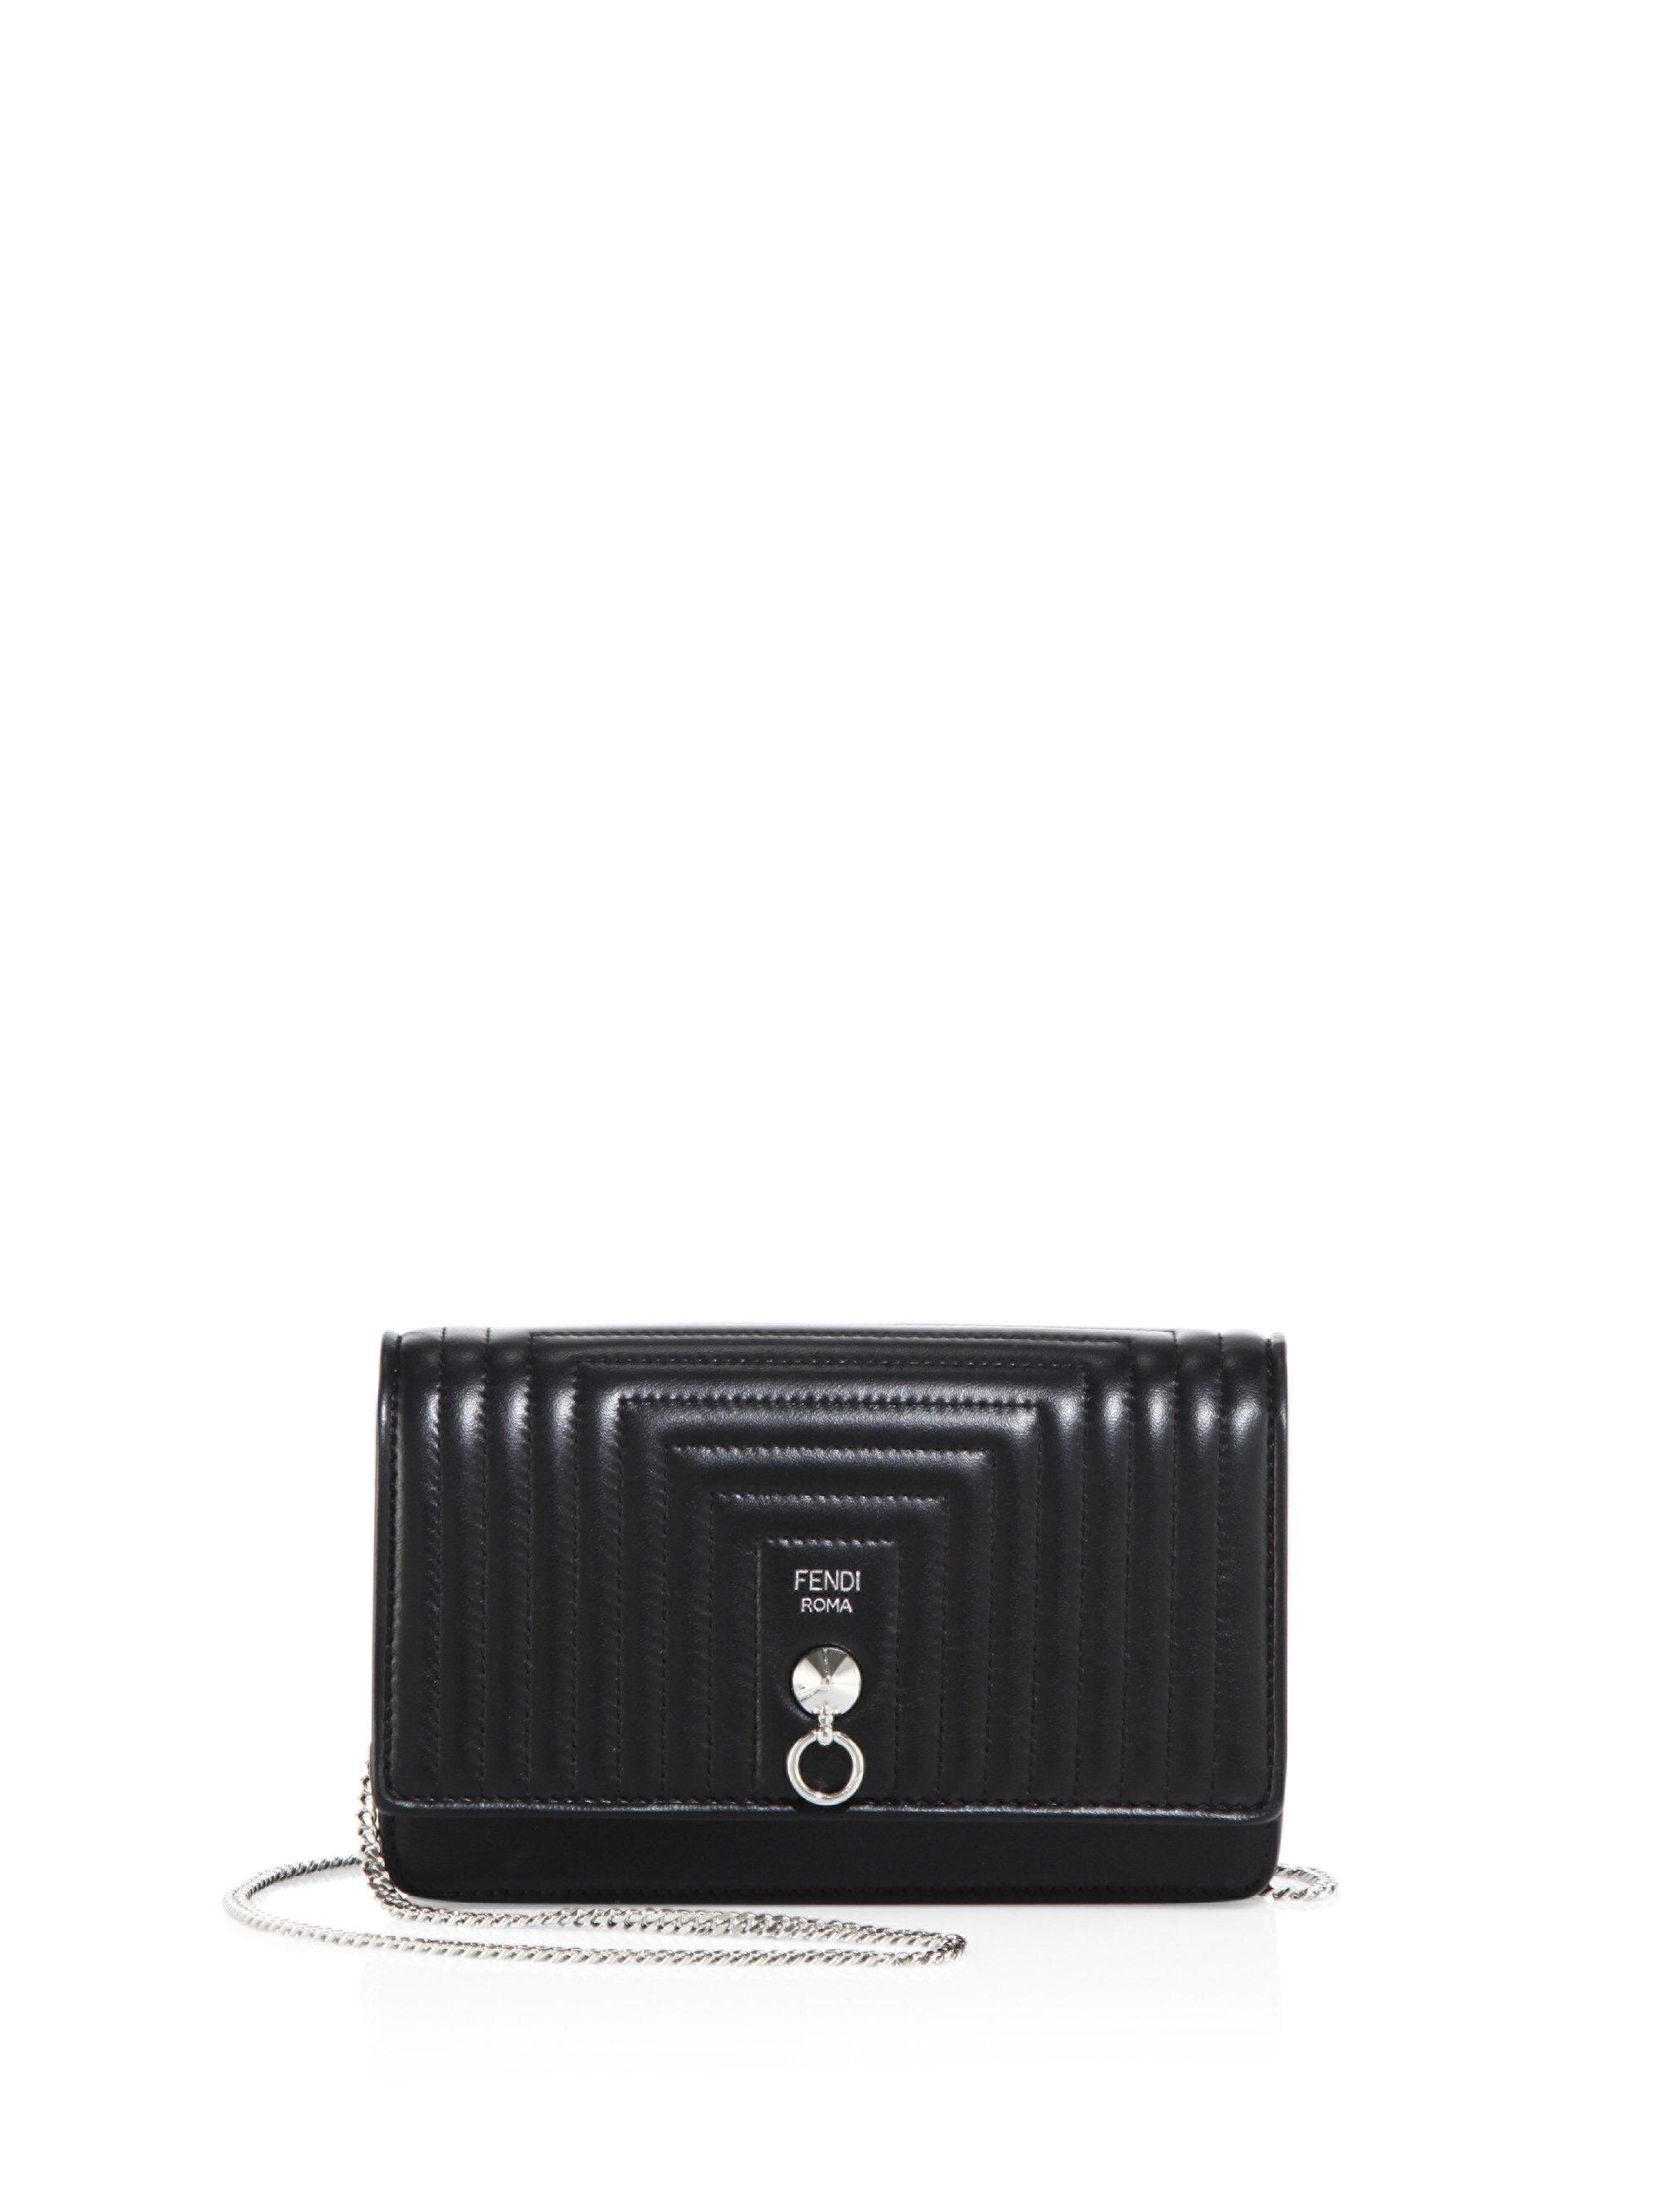 Fendi Dotcom Quilted Leather Chain Wallet in Black — UFO No More